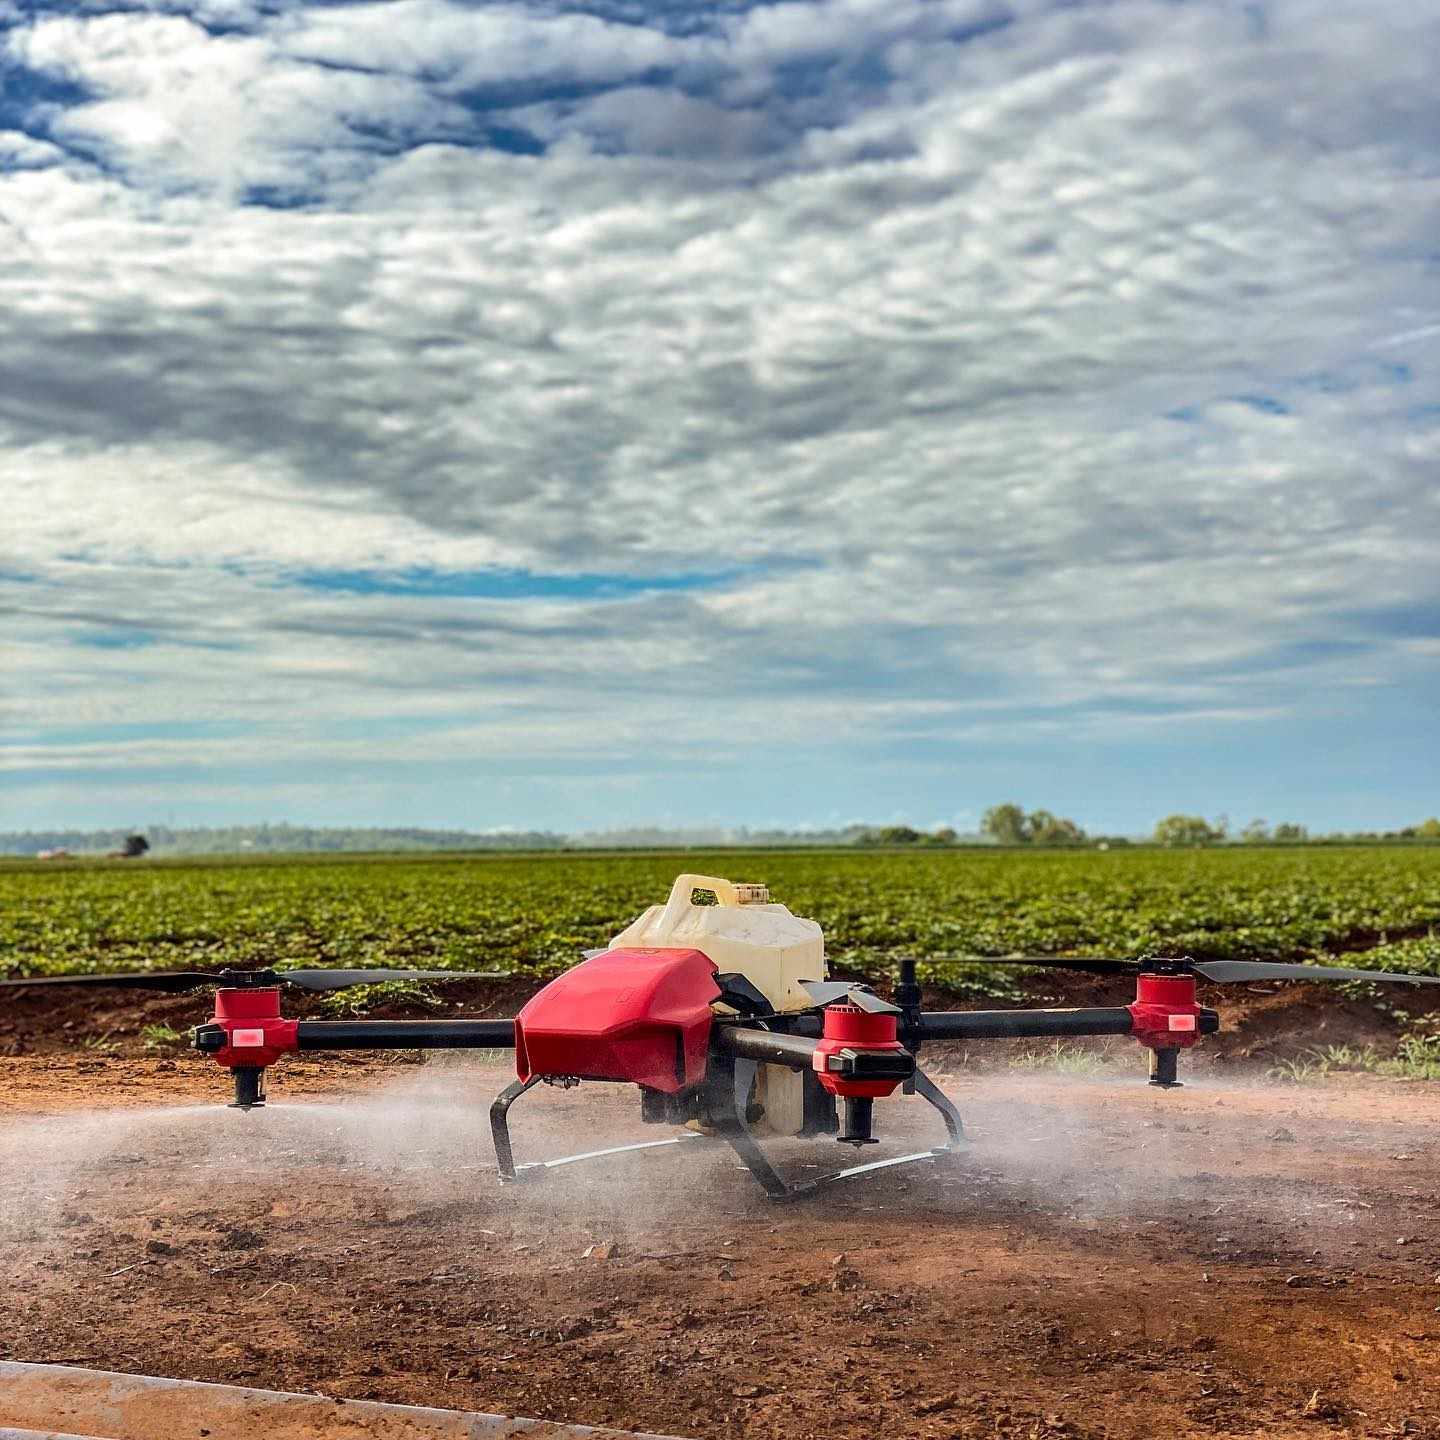 When the sky has cleared up, the XAG drone was tested its atomisation spray effect which could reduce use of pesticides and water, therefore helping preserve soil moisture to better handle the dry condition.